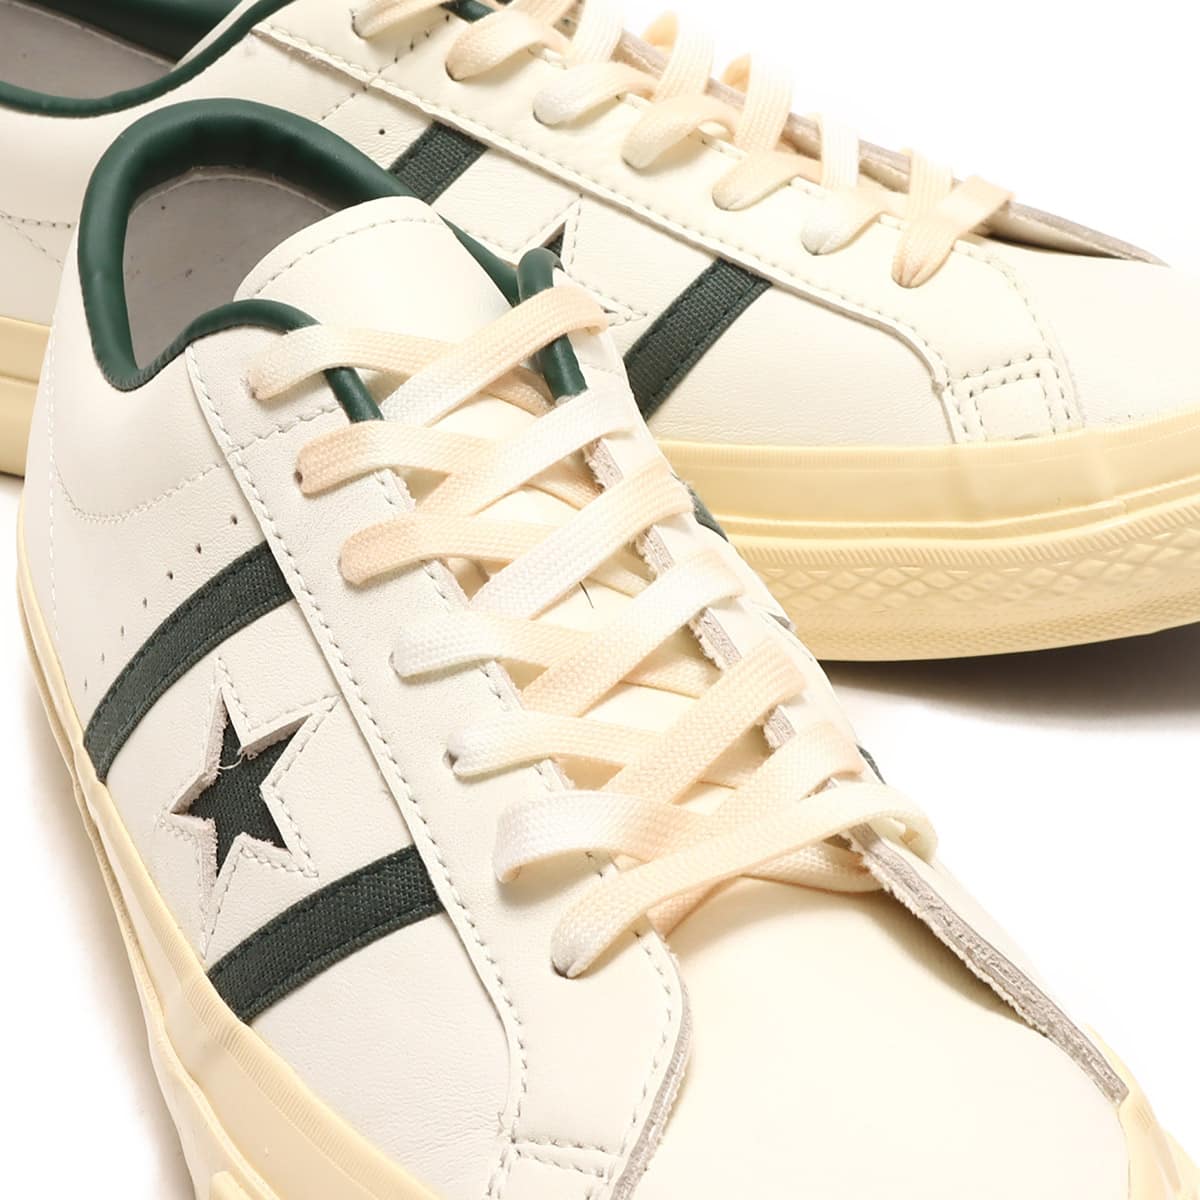 CONVERSE S&B US PC LEATHER OFF WHITE/VTG GREEN 23SS-I